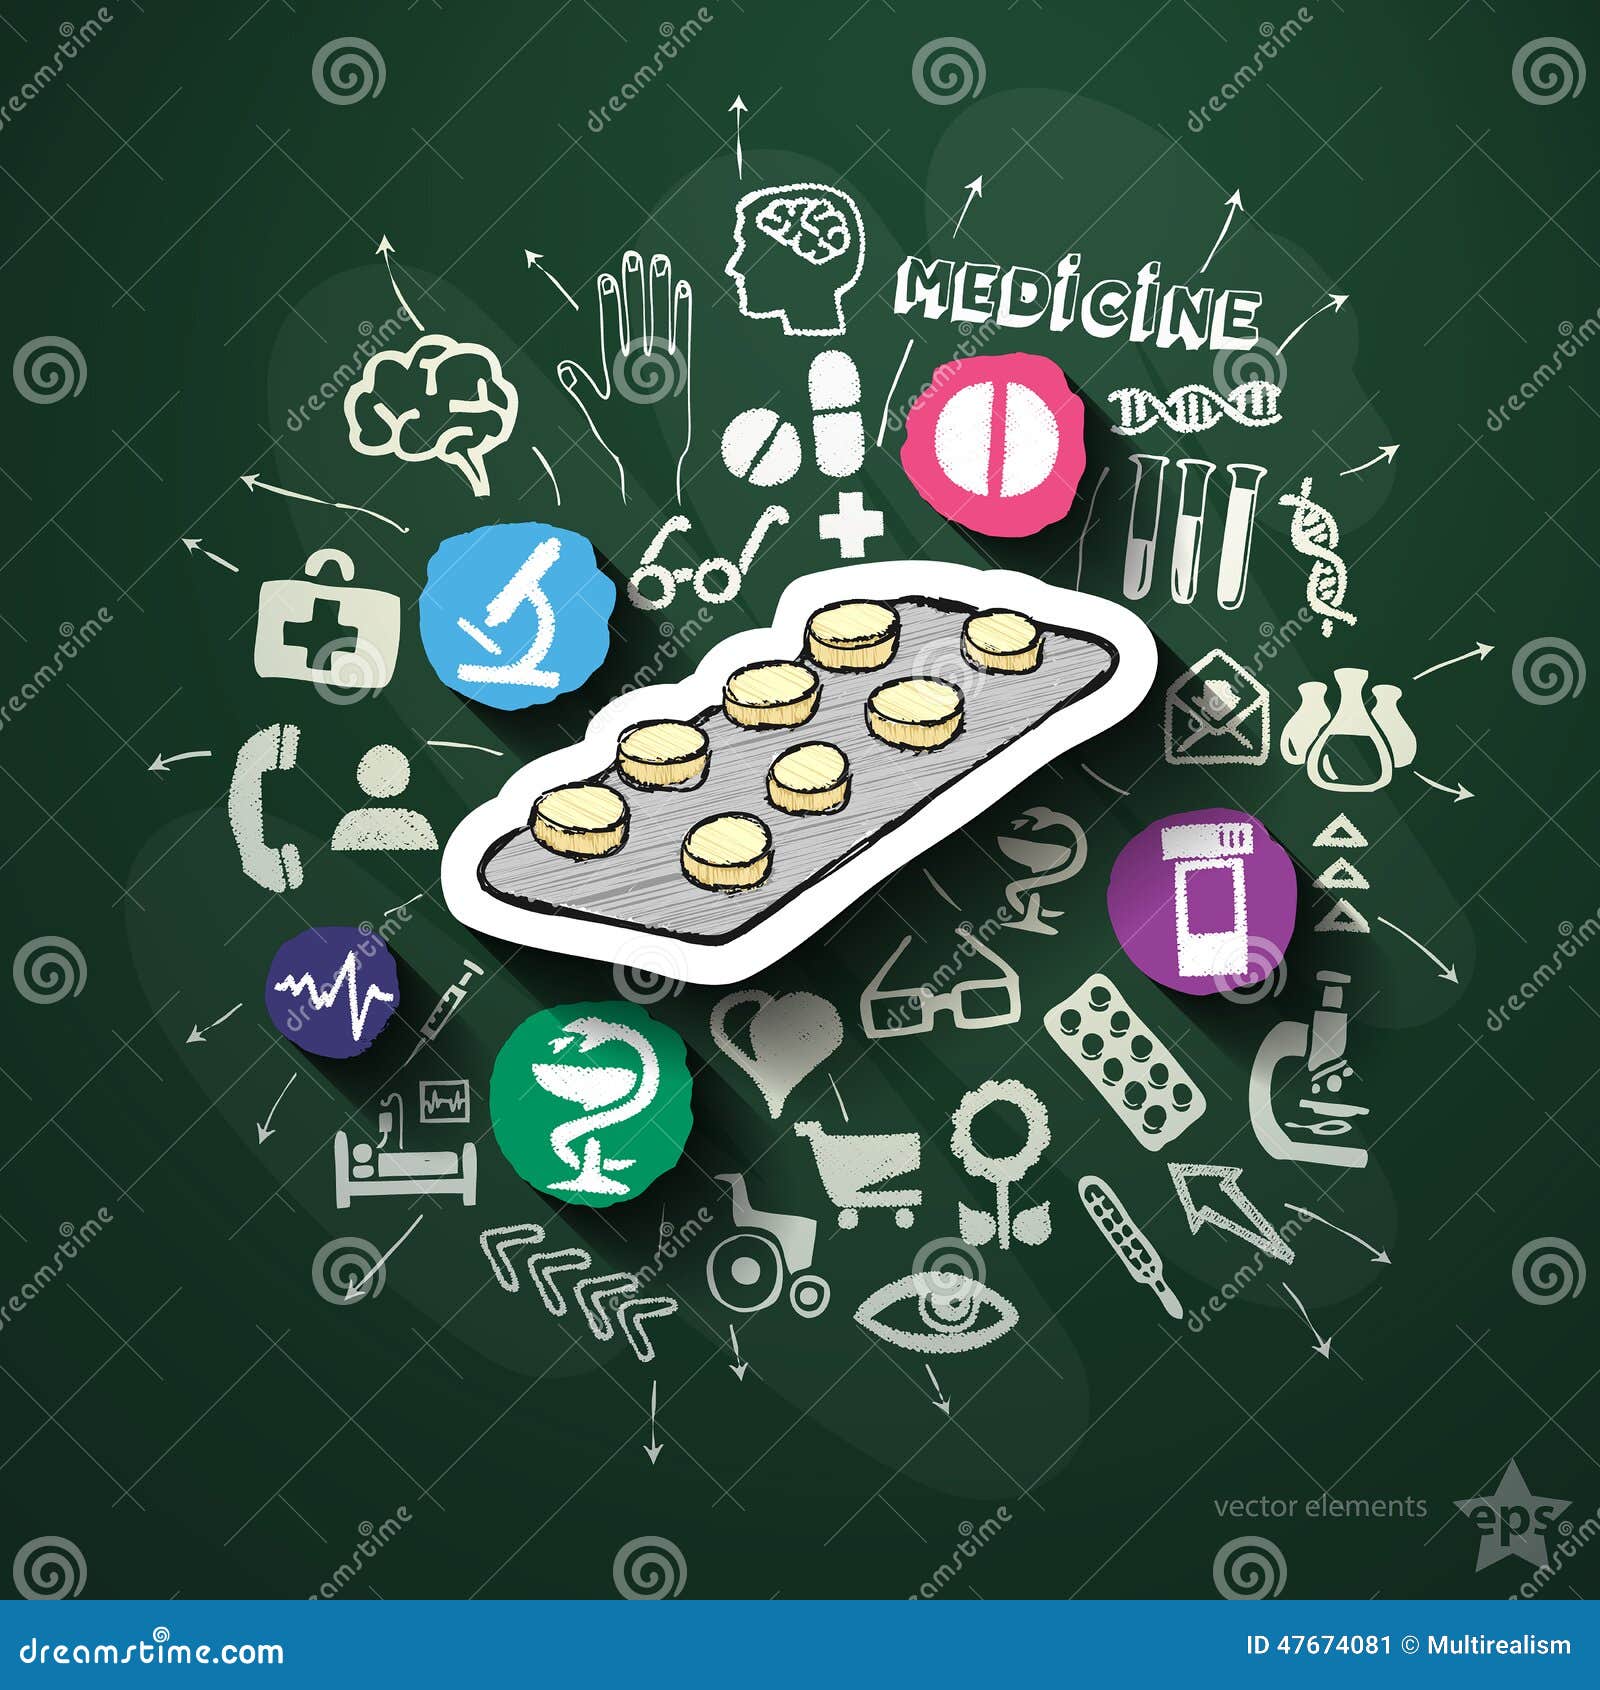 medicine collage with icons on blackboard